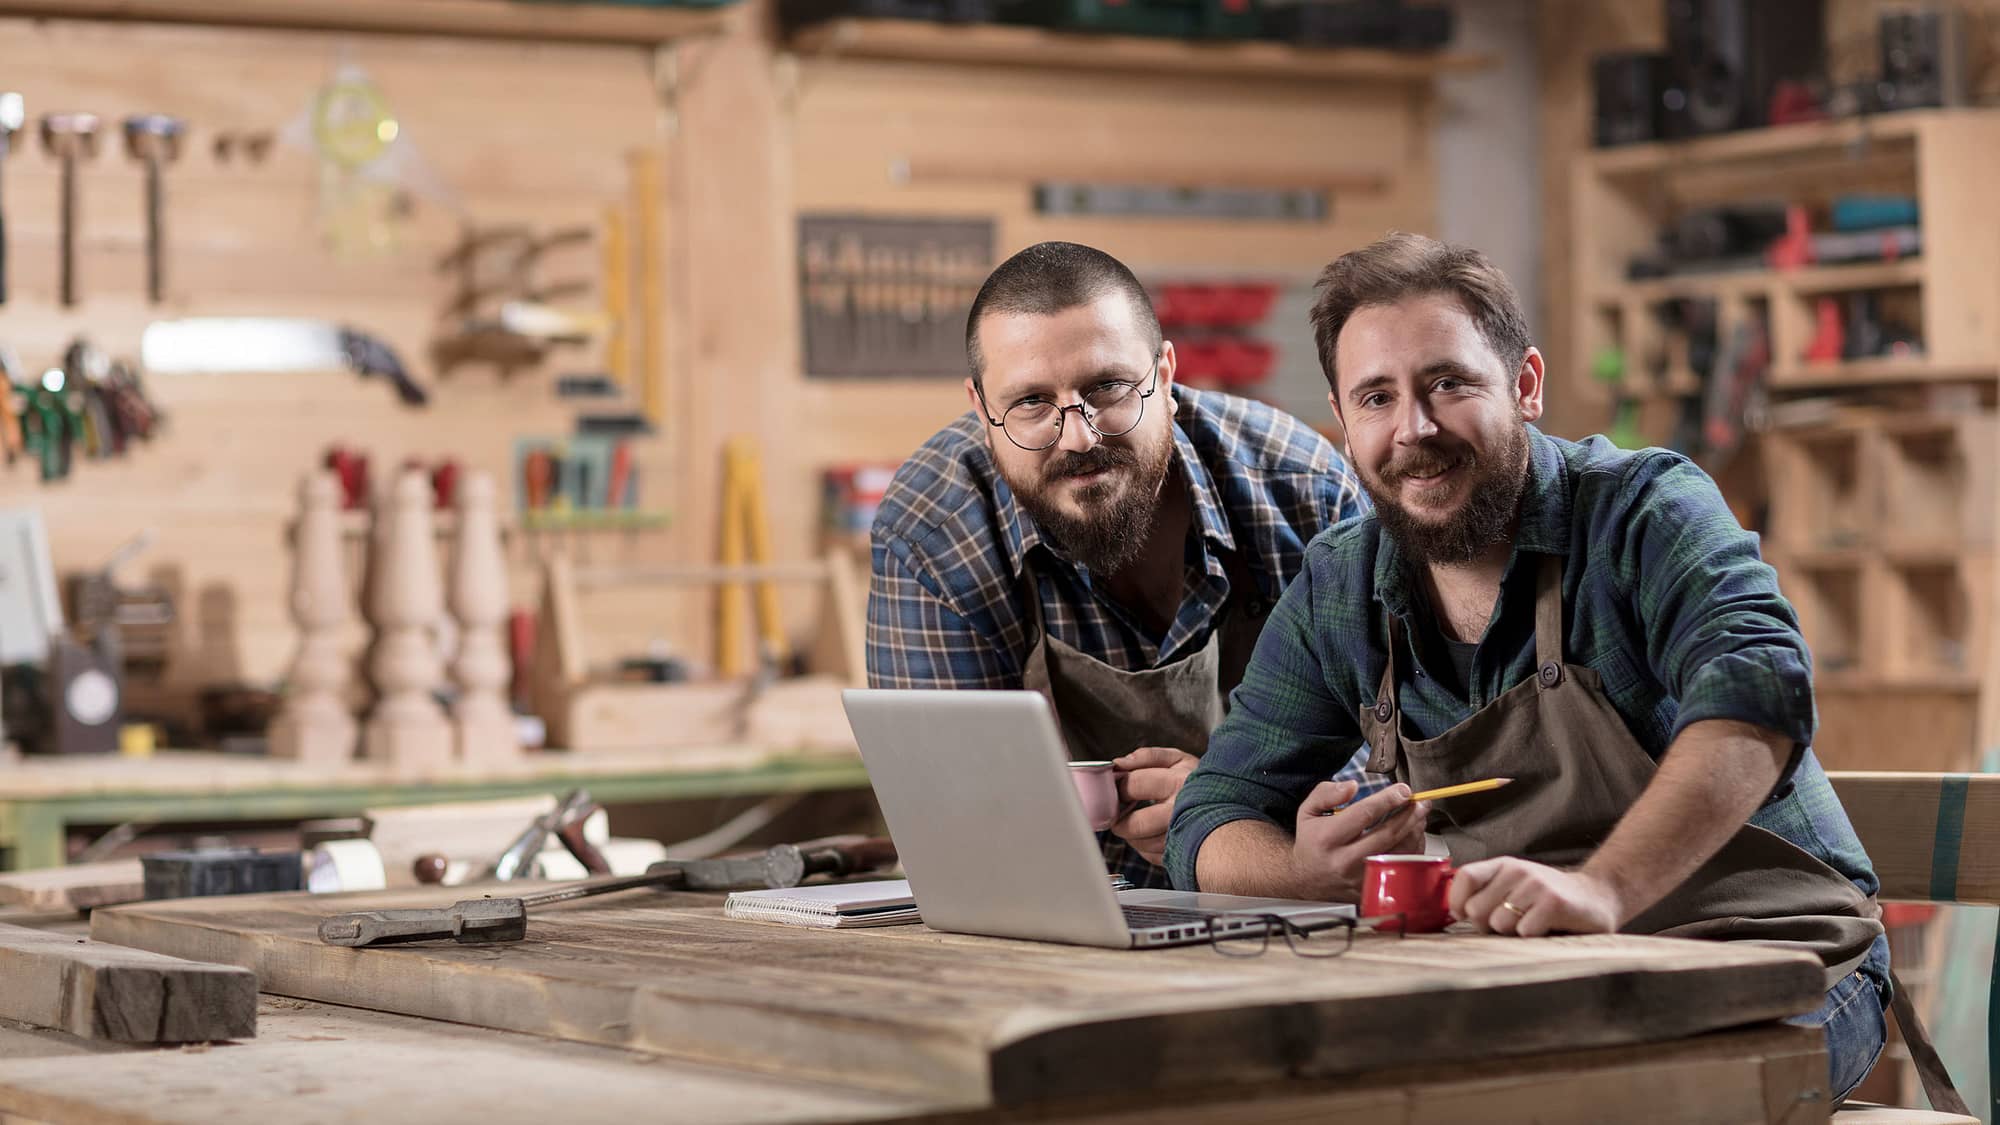 Employer and employee in wood shop looking at laptop.